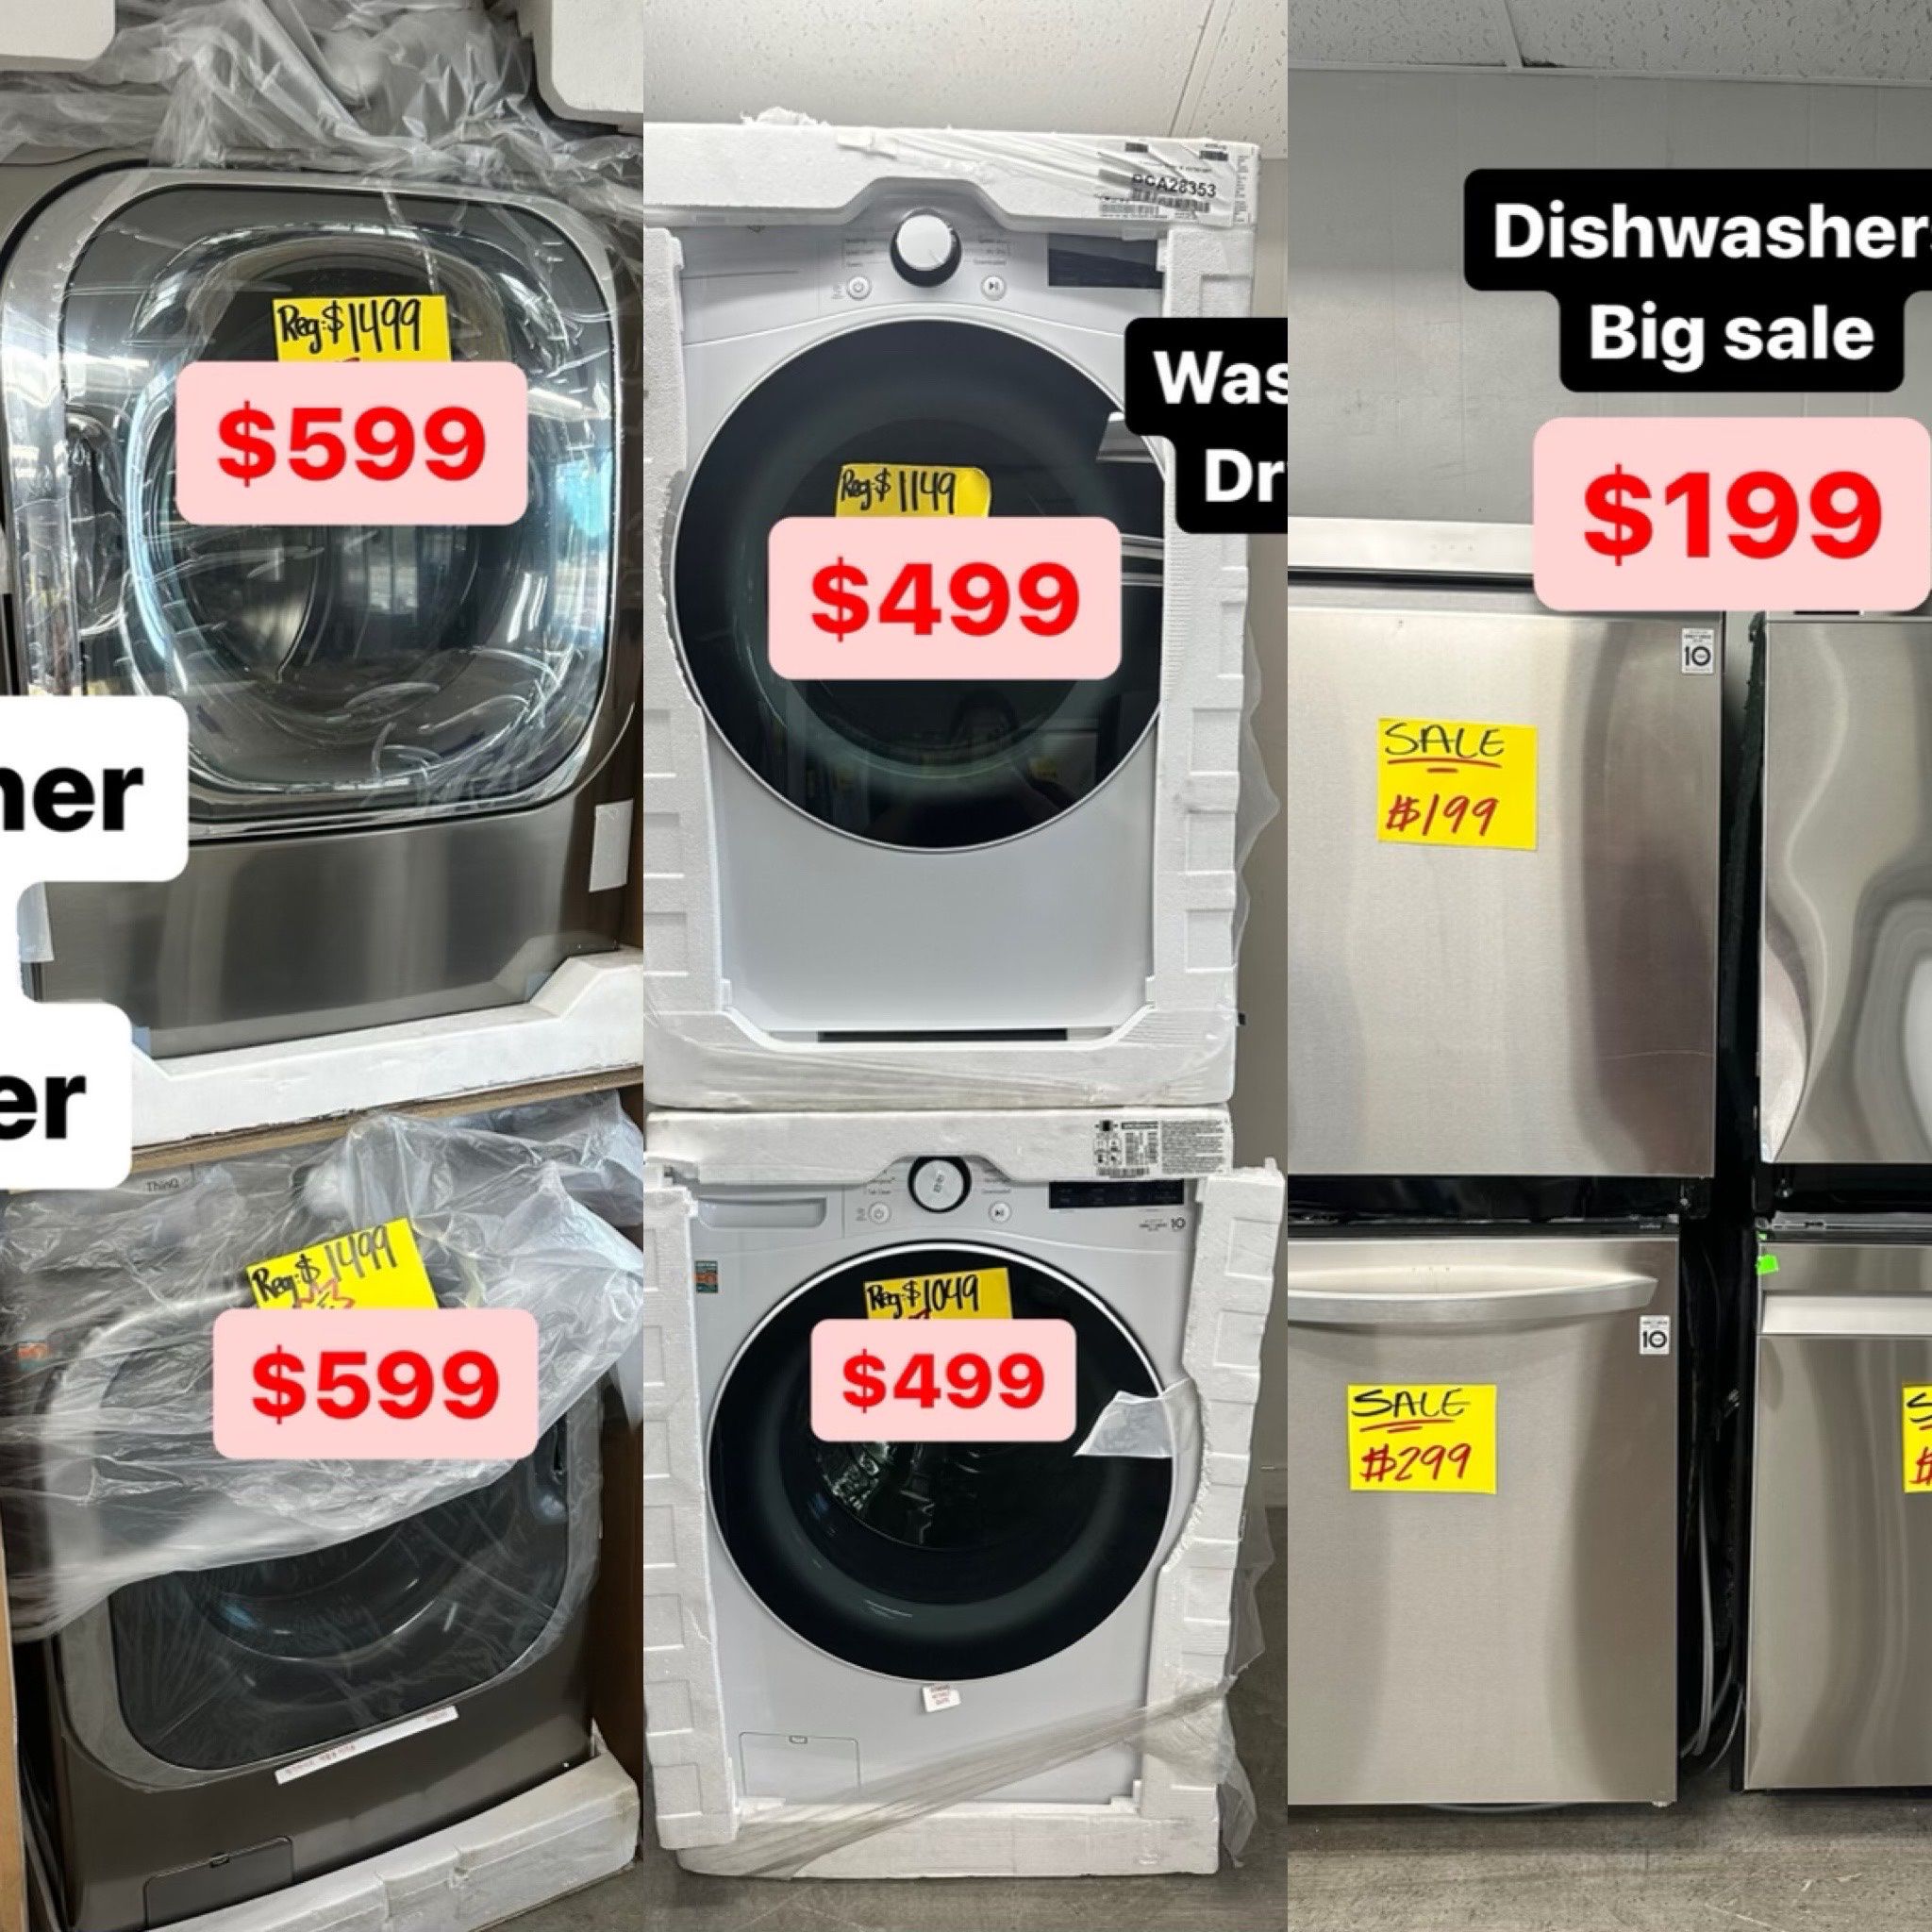 $499 Washer And Dryer Only $499